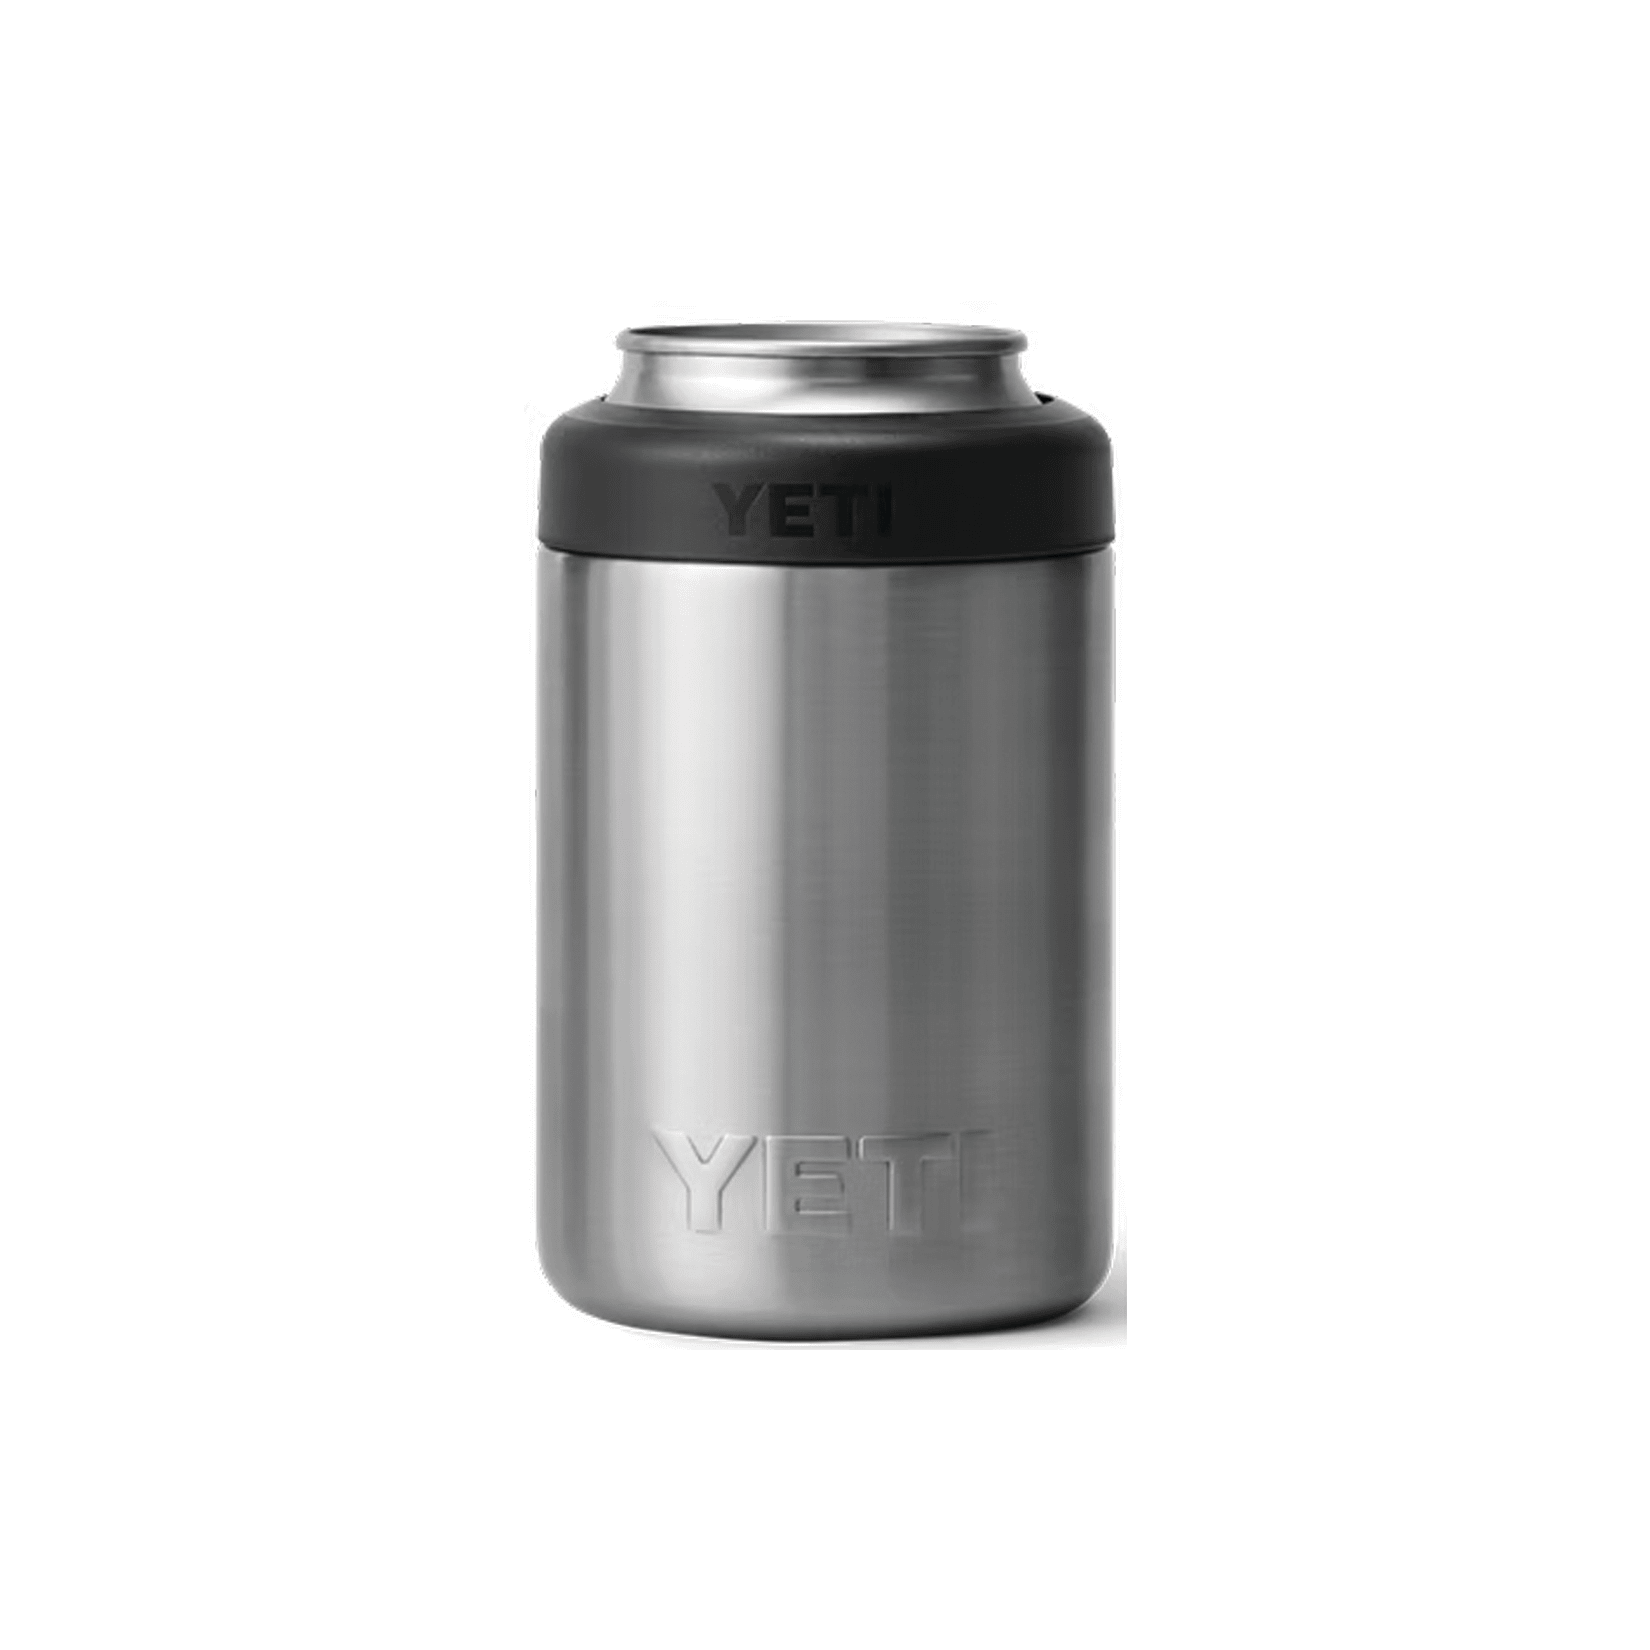 https://image.fisheriessupply.com/c_lpad,dpr_3.0,w_550,h_550,d_imageComingSoon-tiff/f_auto,q_auto/v1/static-images/yeti-coolers-rambler-insulated-colster-stainless